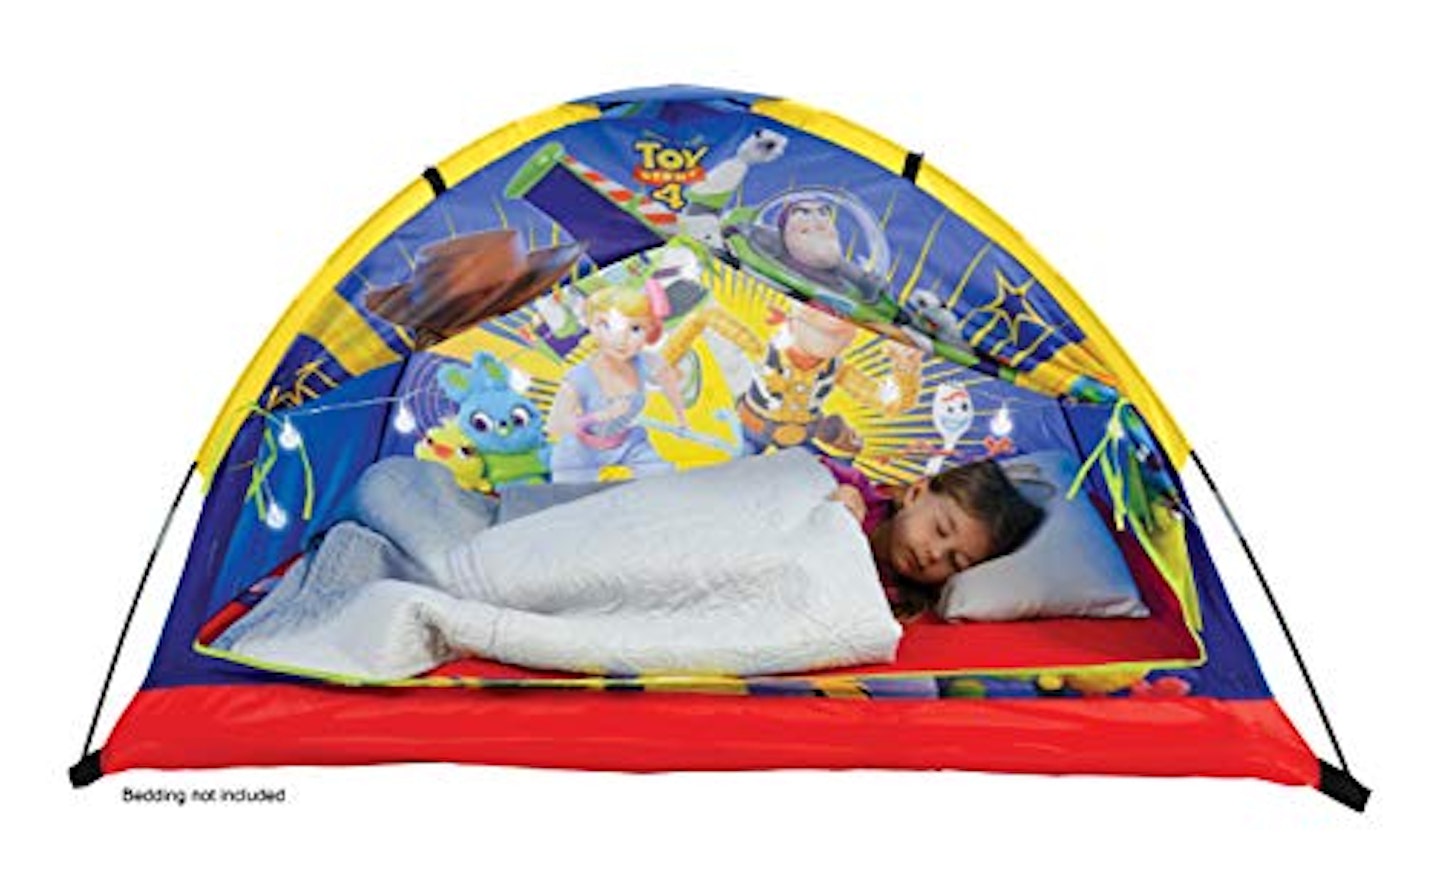 Toy Story M009710 4 My Dream Den Tent